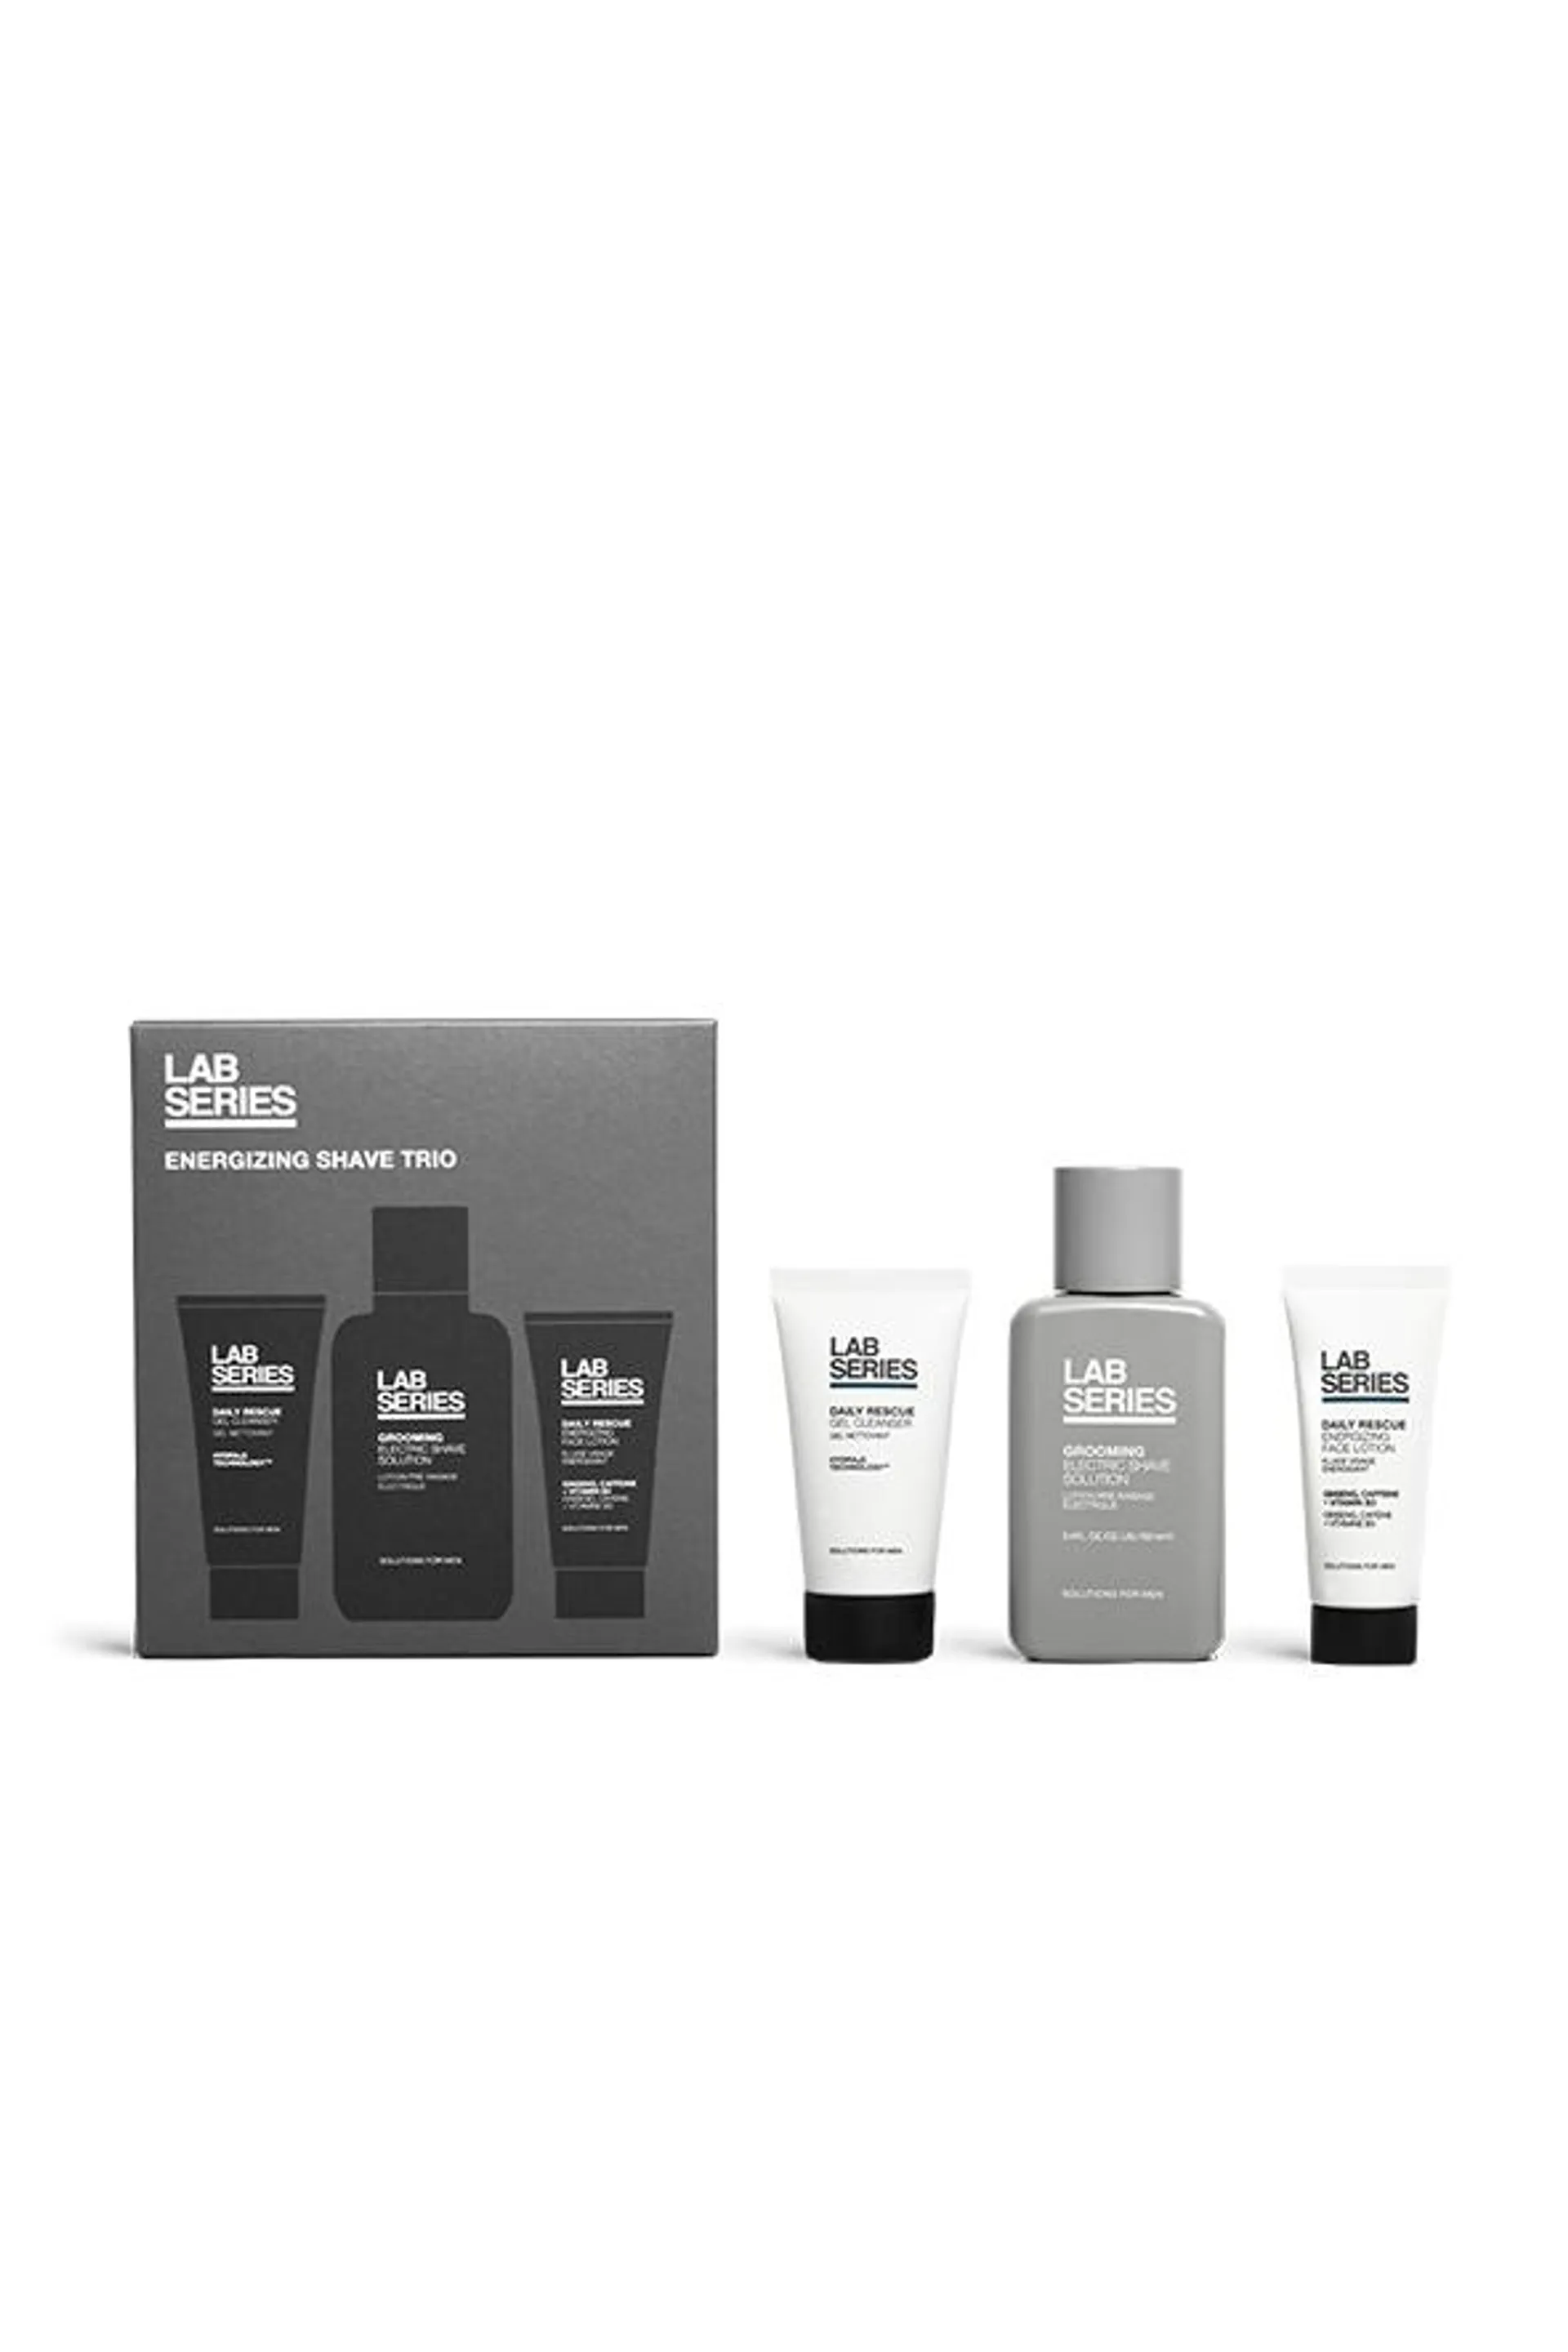 Up your grooming game with this Energising Shave Trio men's skincare gift set.